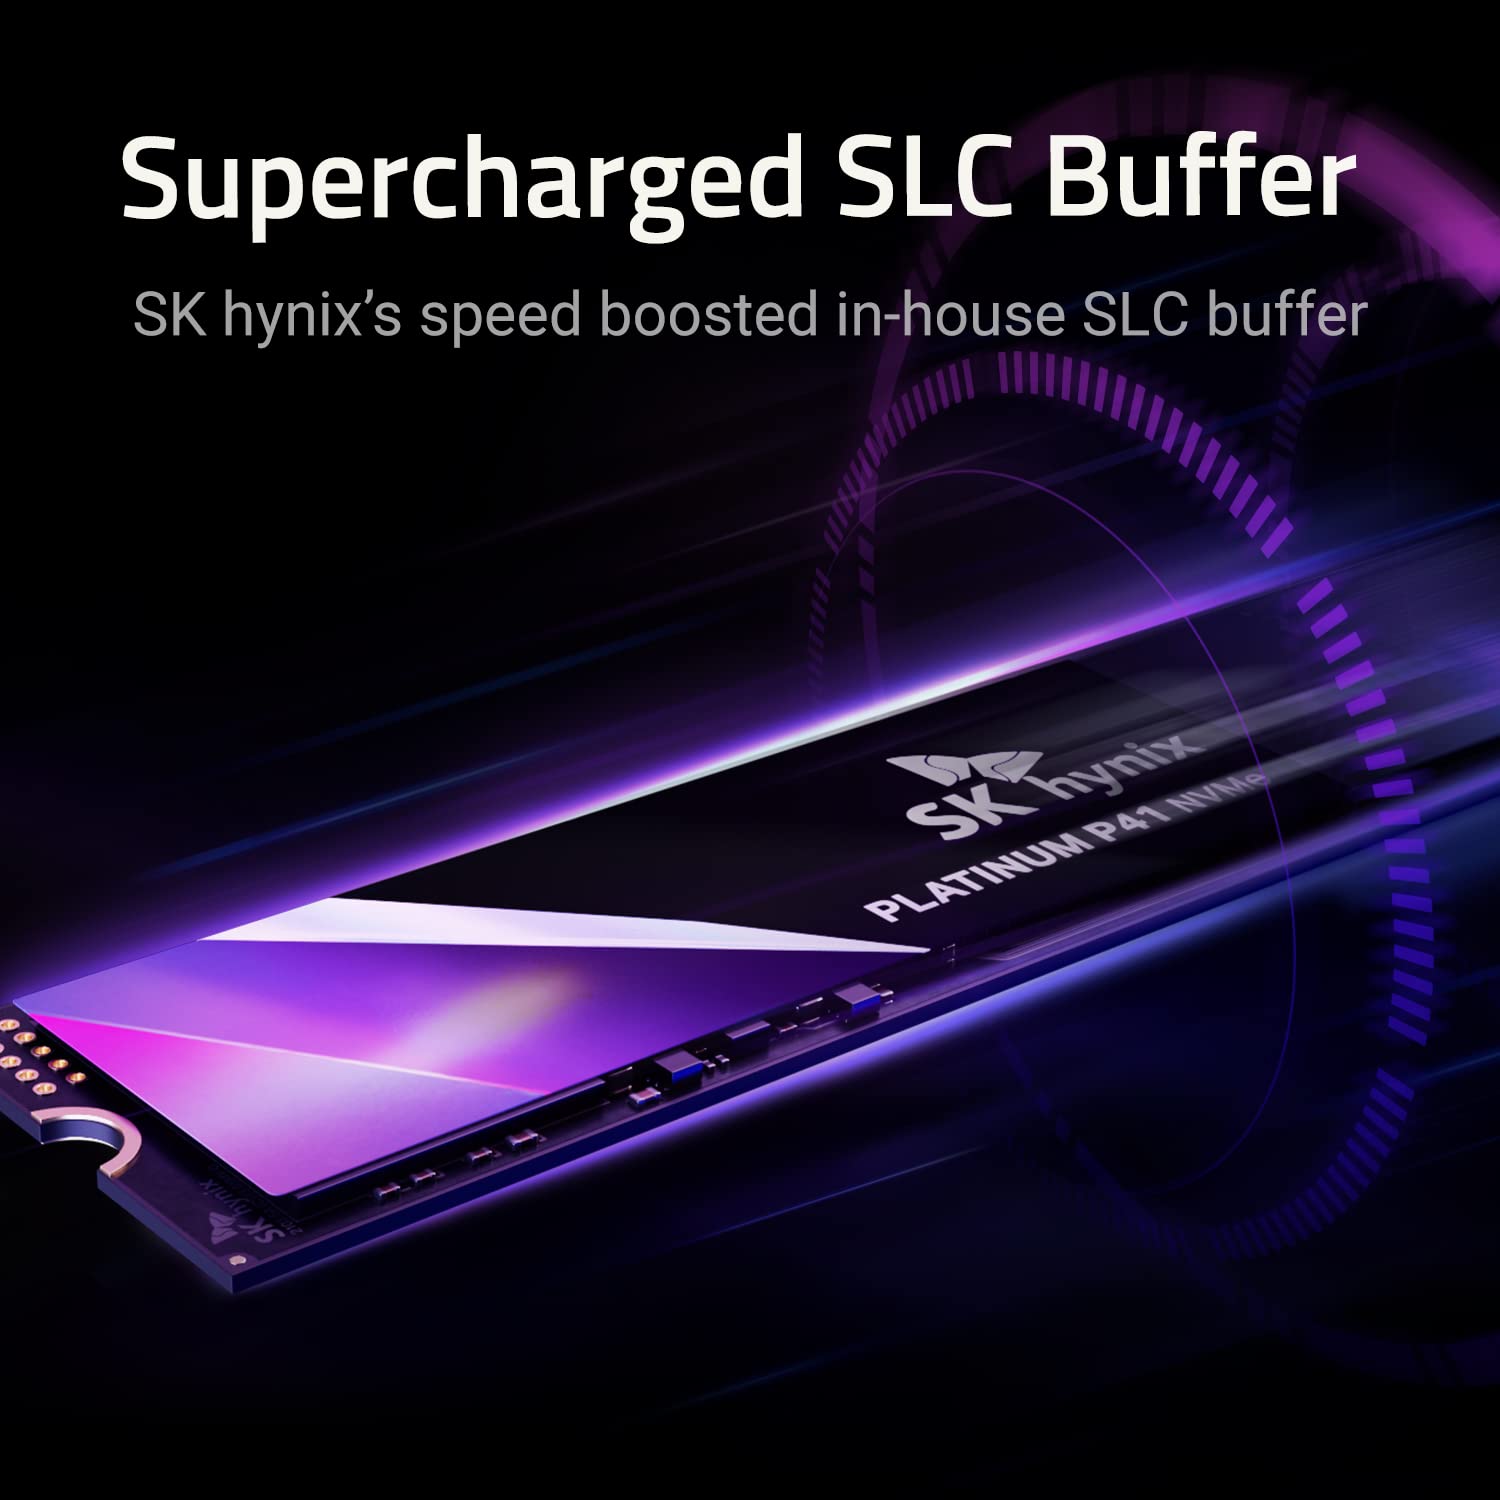 SK hynix Platinum P41 1TB PCIe NVMe Gen4 M.2 2280 Internal Gaming SSD, Up to 7,000MB/S, Compact M.2 SSD Form Factor SSD - Internal Solid State Drive with 176-Layer NAND Flash